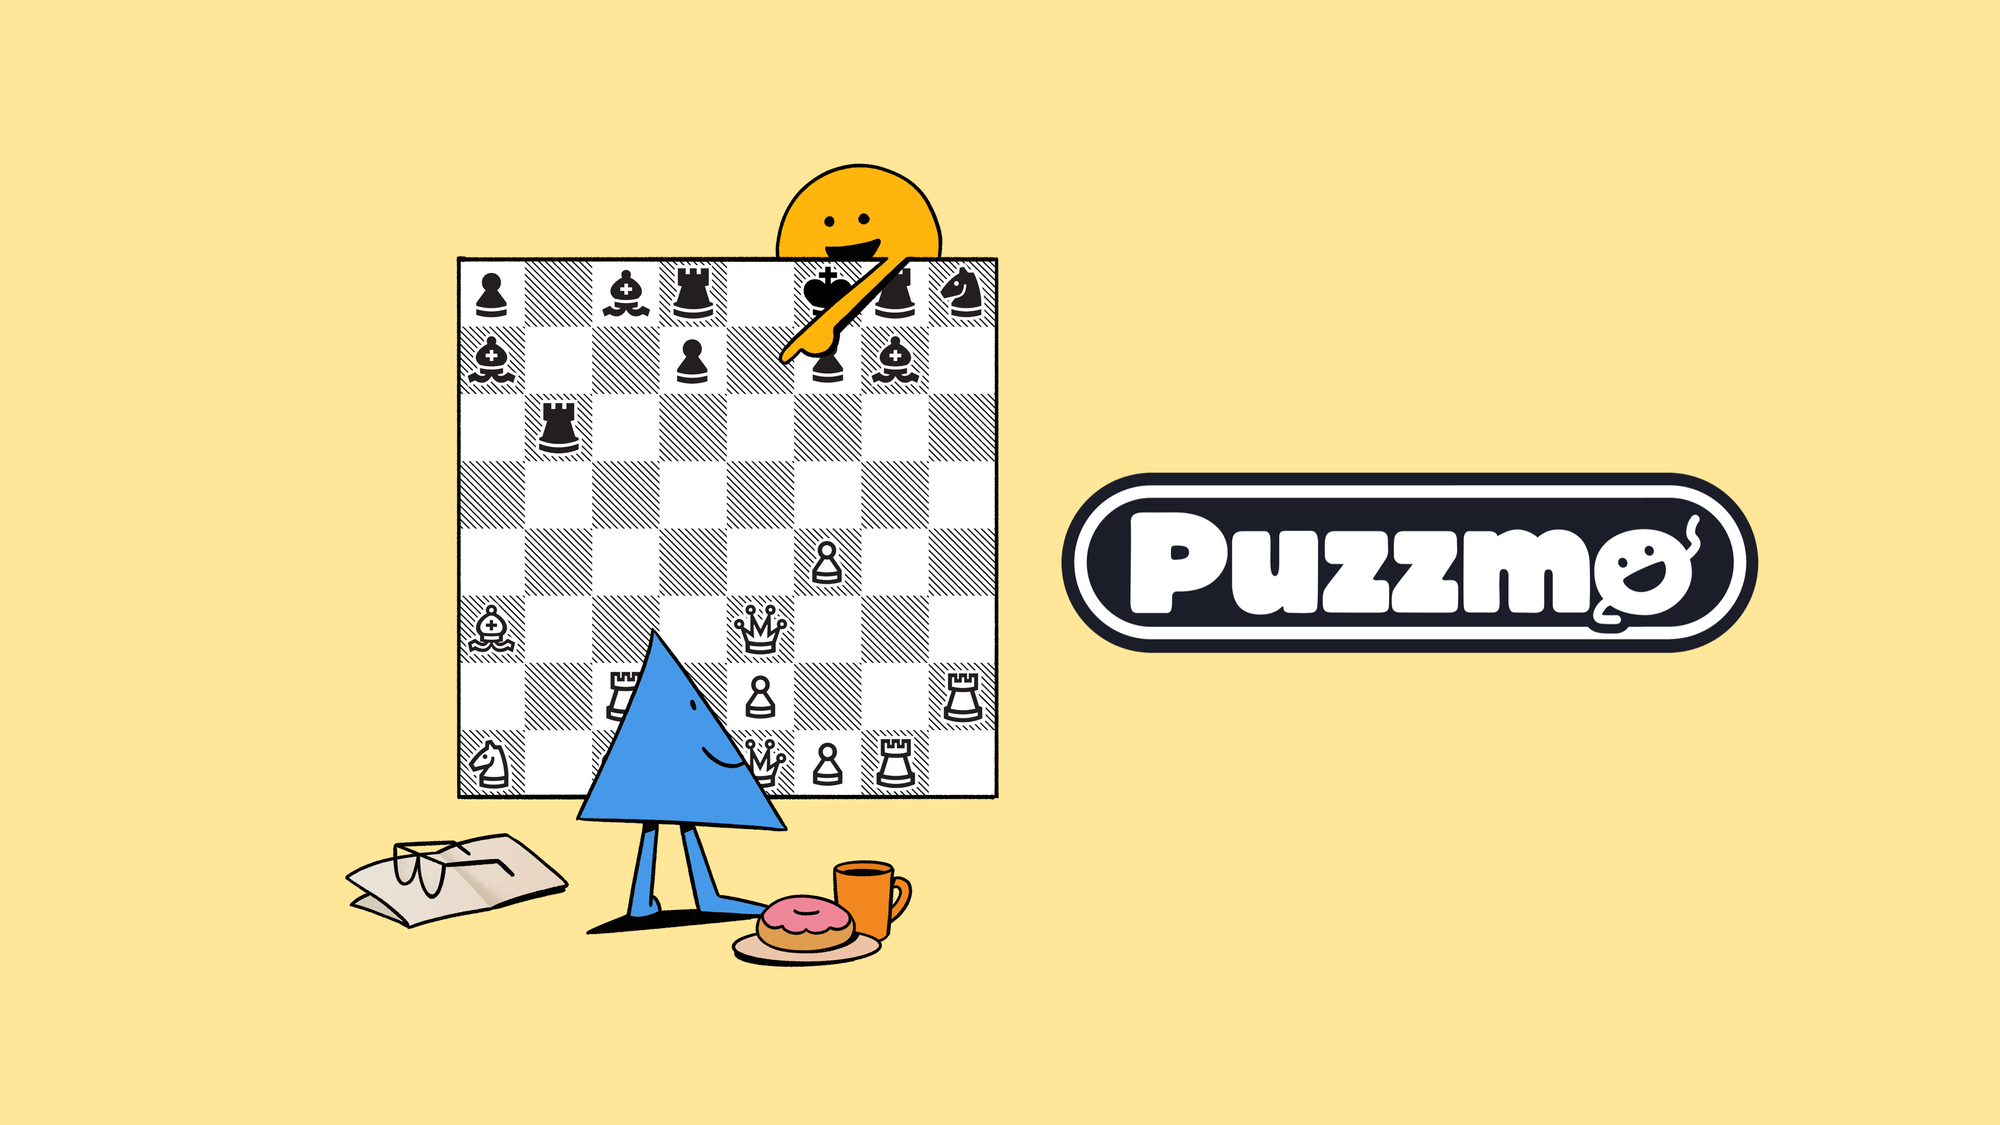 Puzzmo, my favorite new website of 2023, has already been acquired